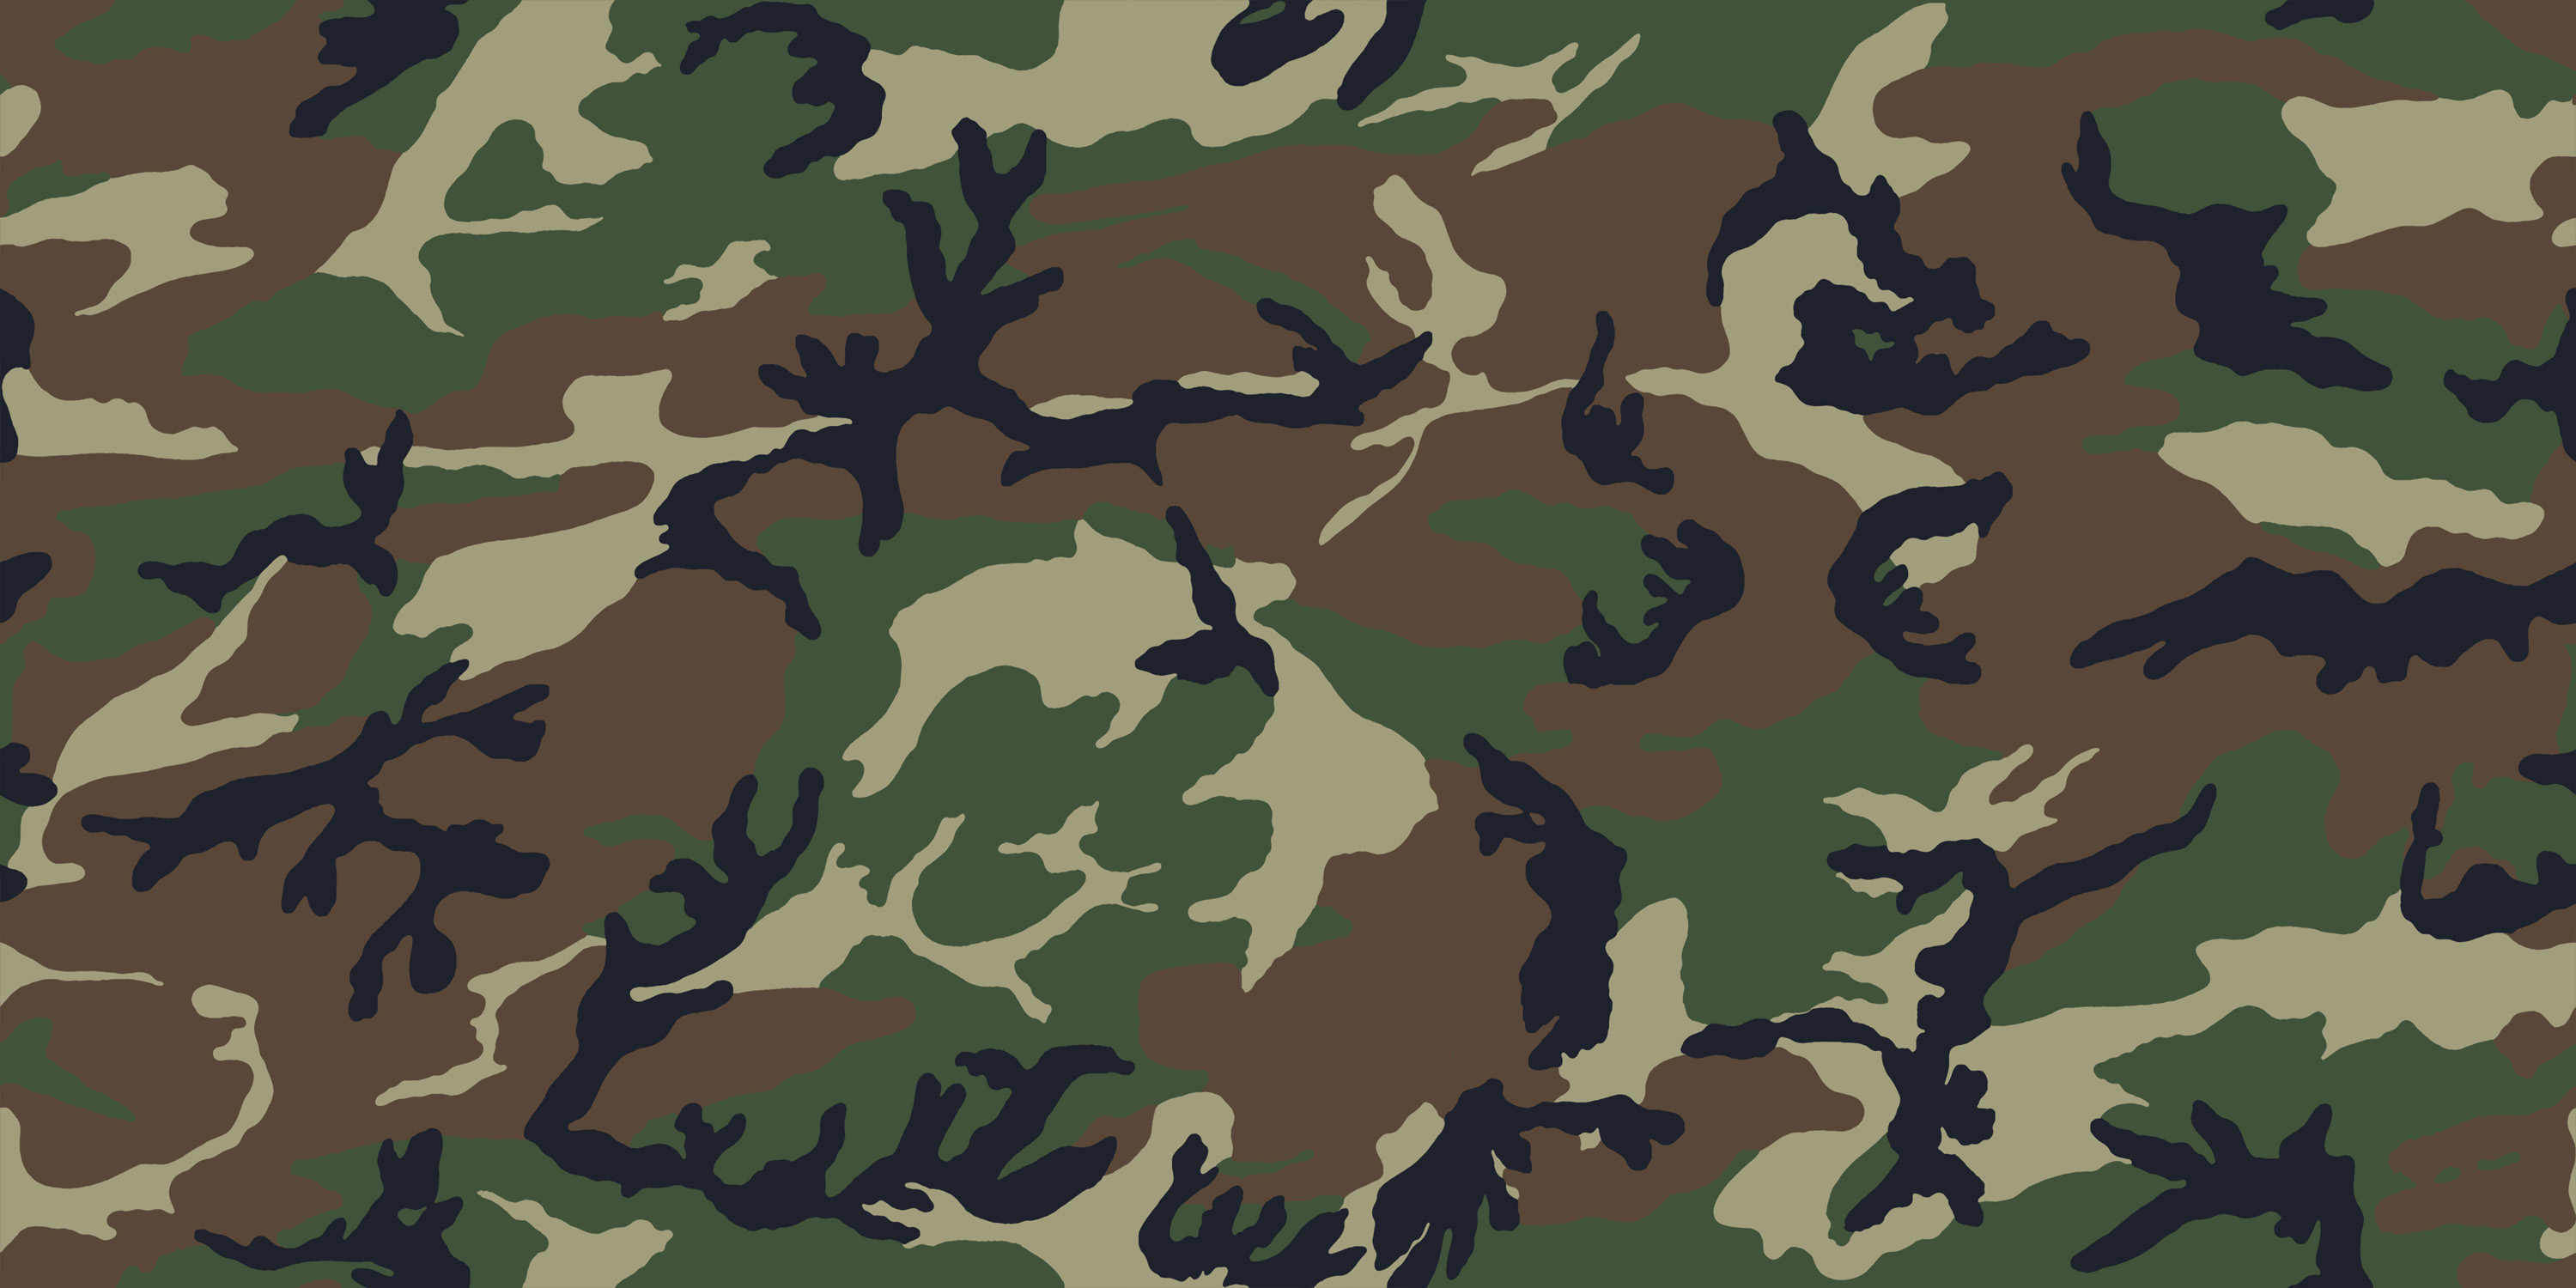 camo wallpaper hd,military camouflage,pattern,camouflage,uniform,clothing